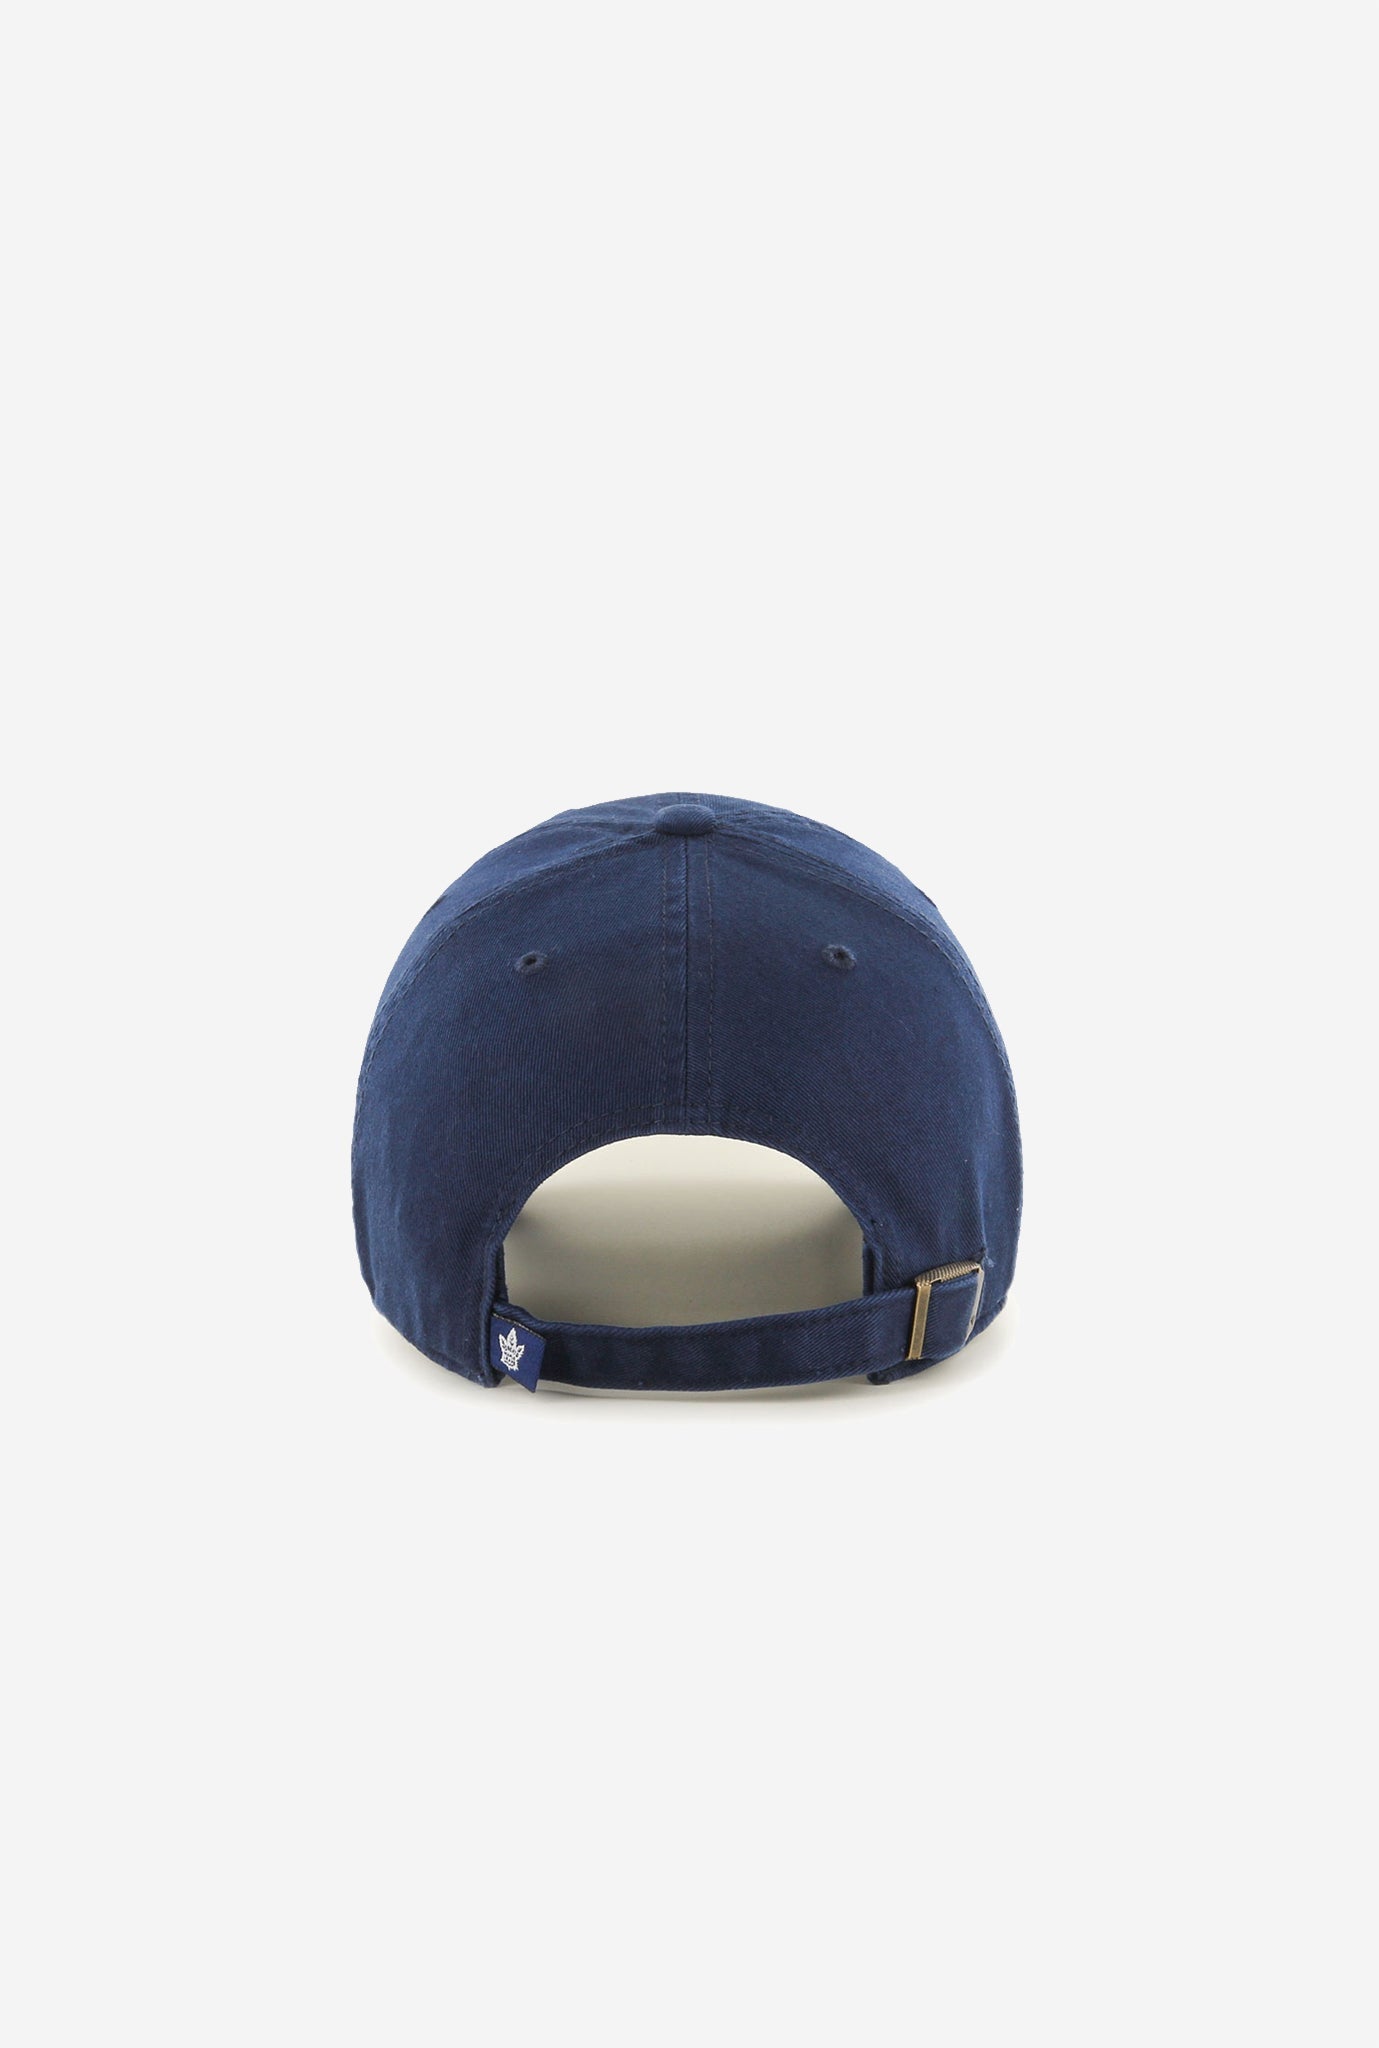 Toronto Maple Leafs Clean Up Cap - Navy